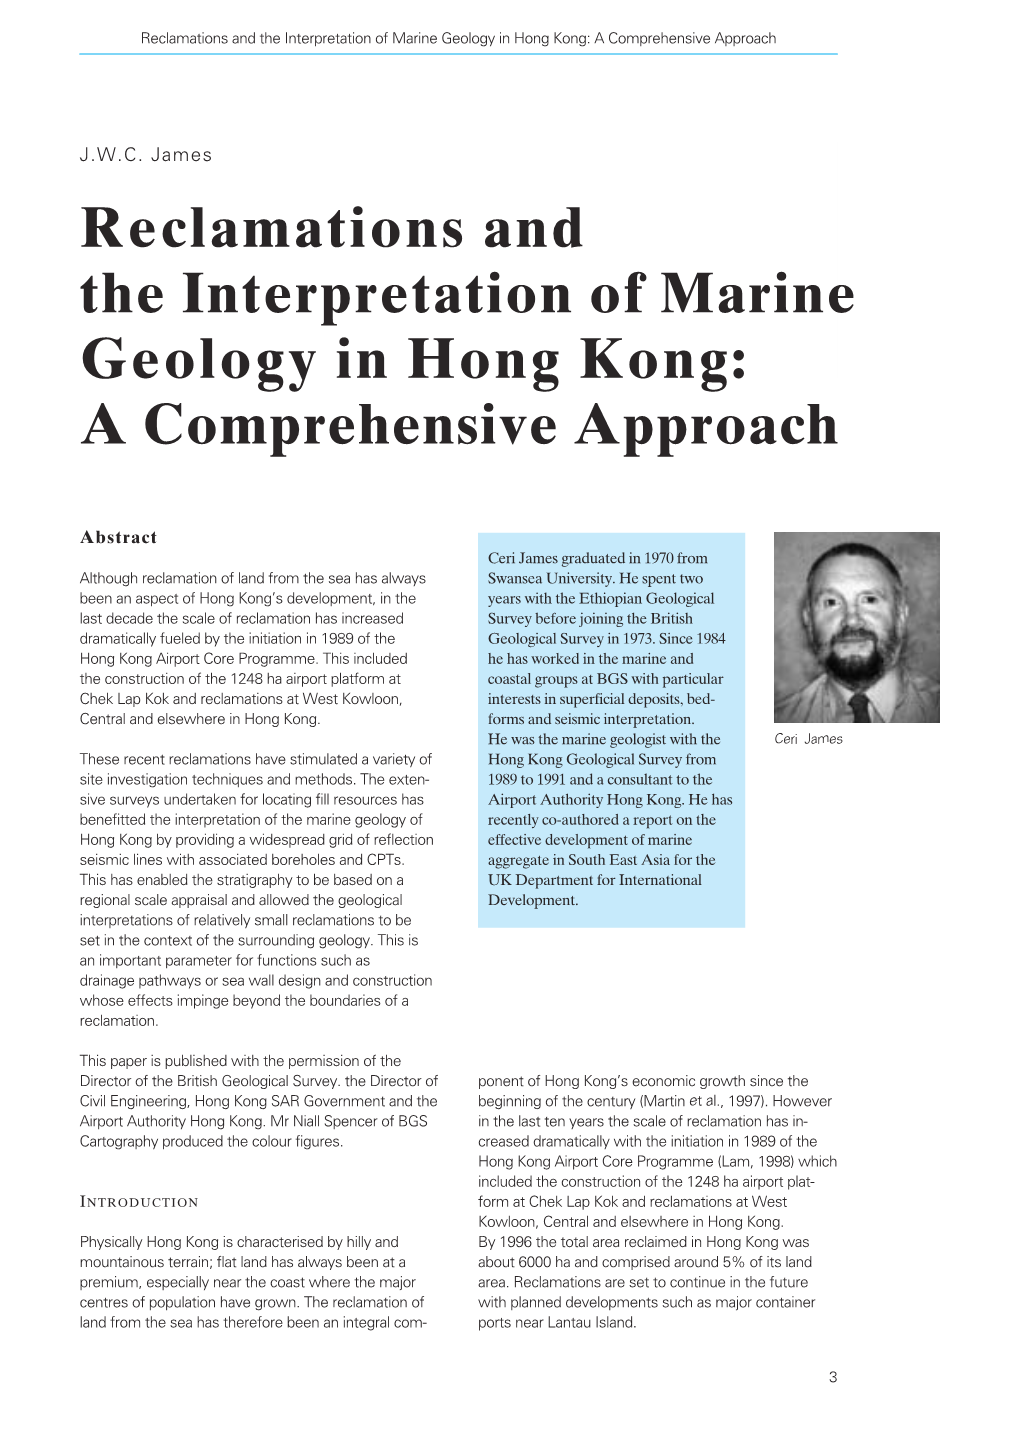 Reclamations and the Interpretation of Marine Geology in Hong Kong: a Comprehensive Approach